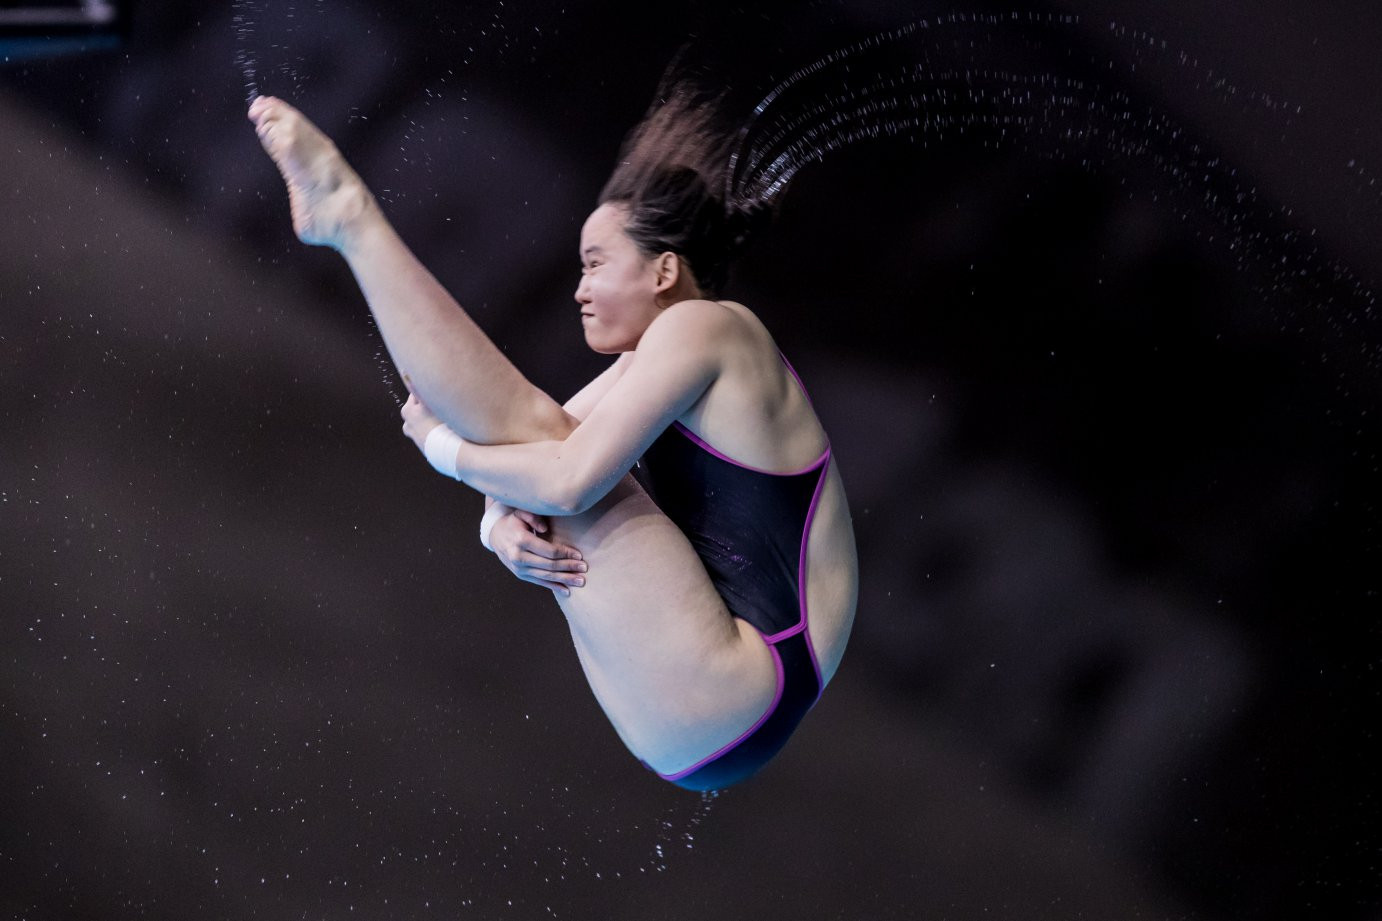  Ren and Cao return China to the gold standard at FINA Diving World Series